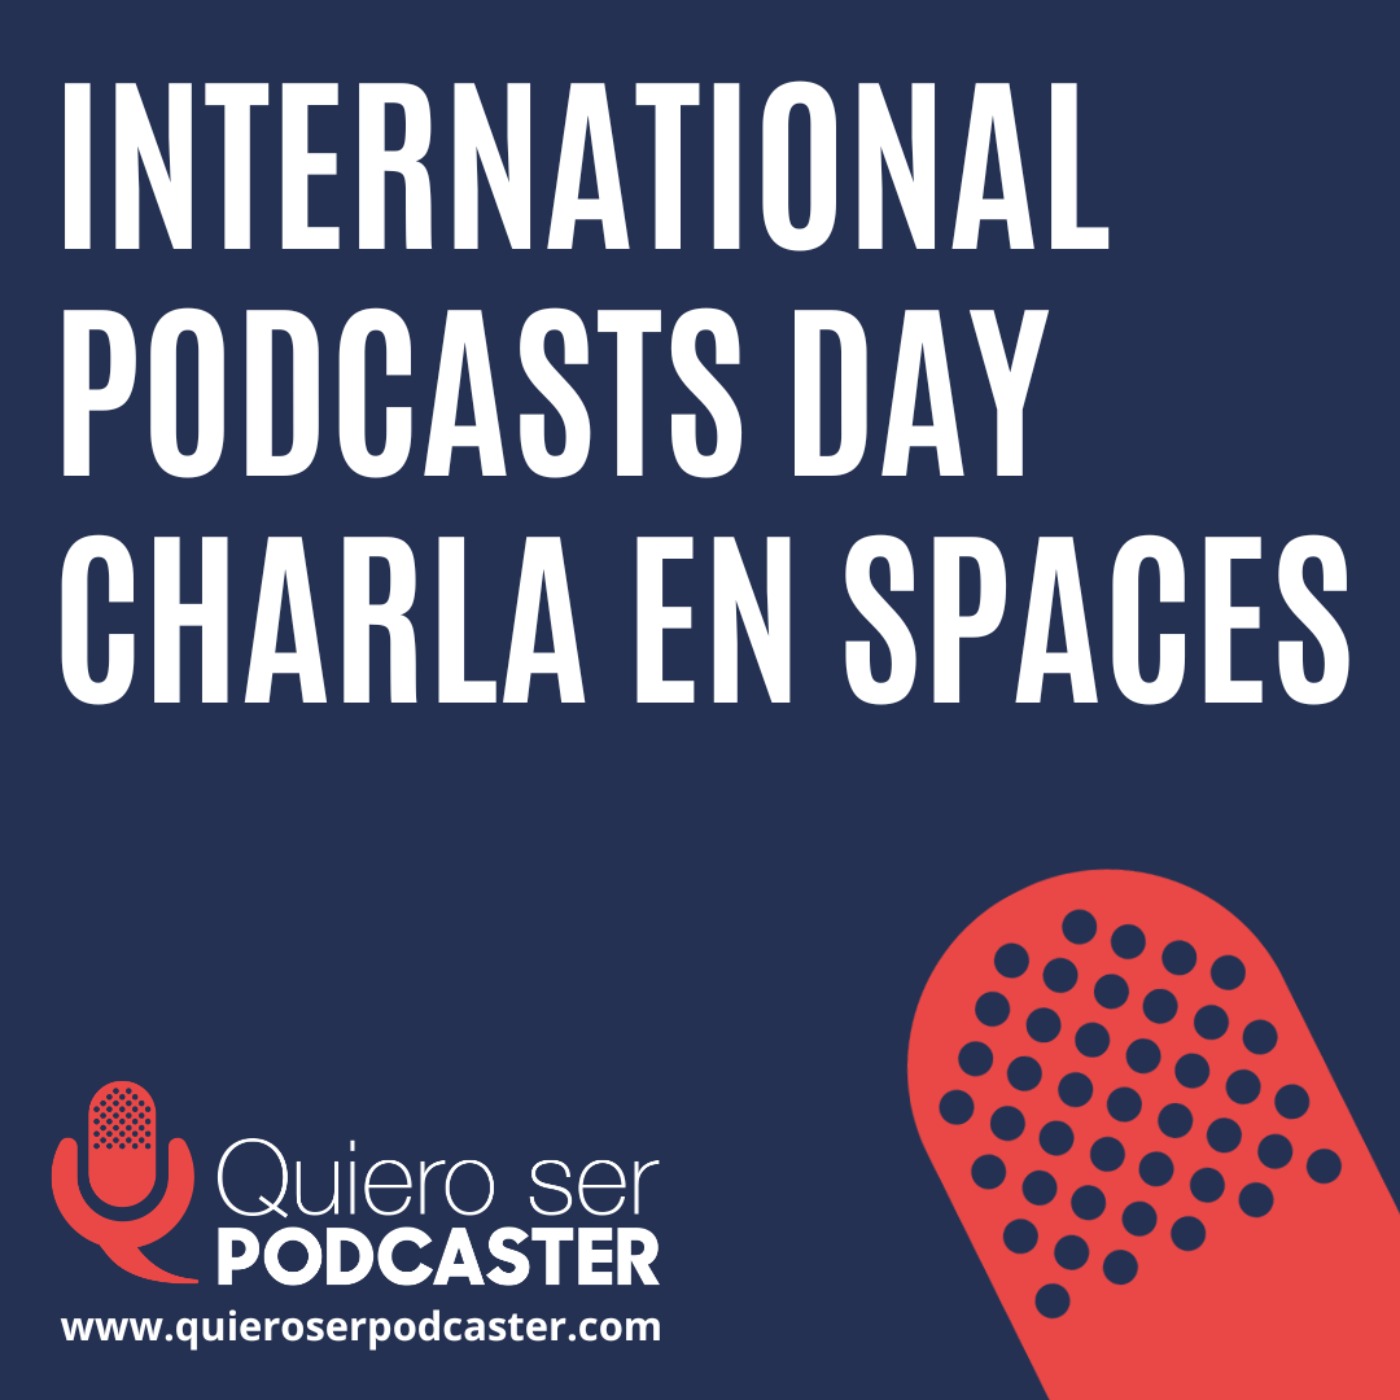 International podcasts day charla en spaces